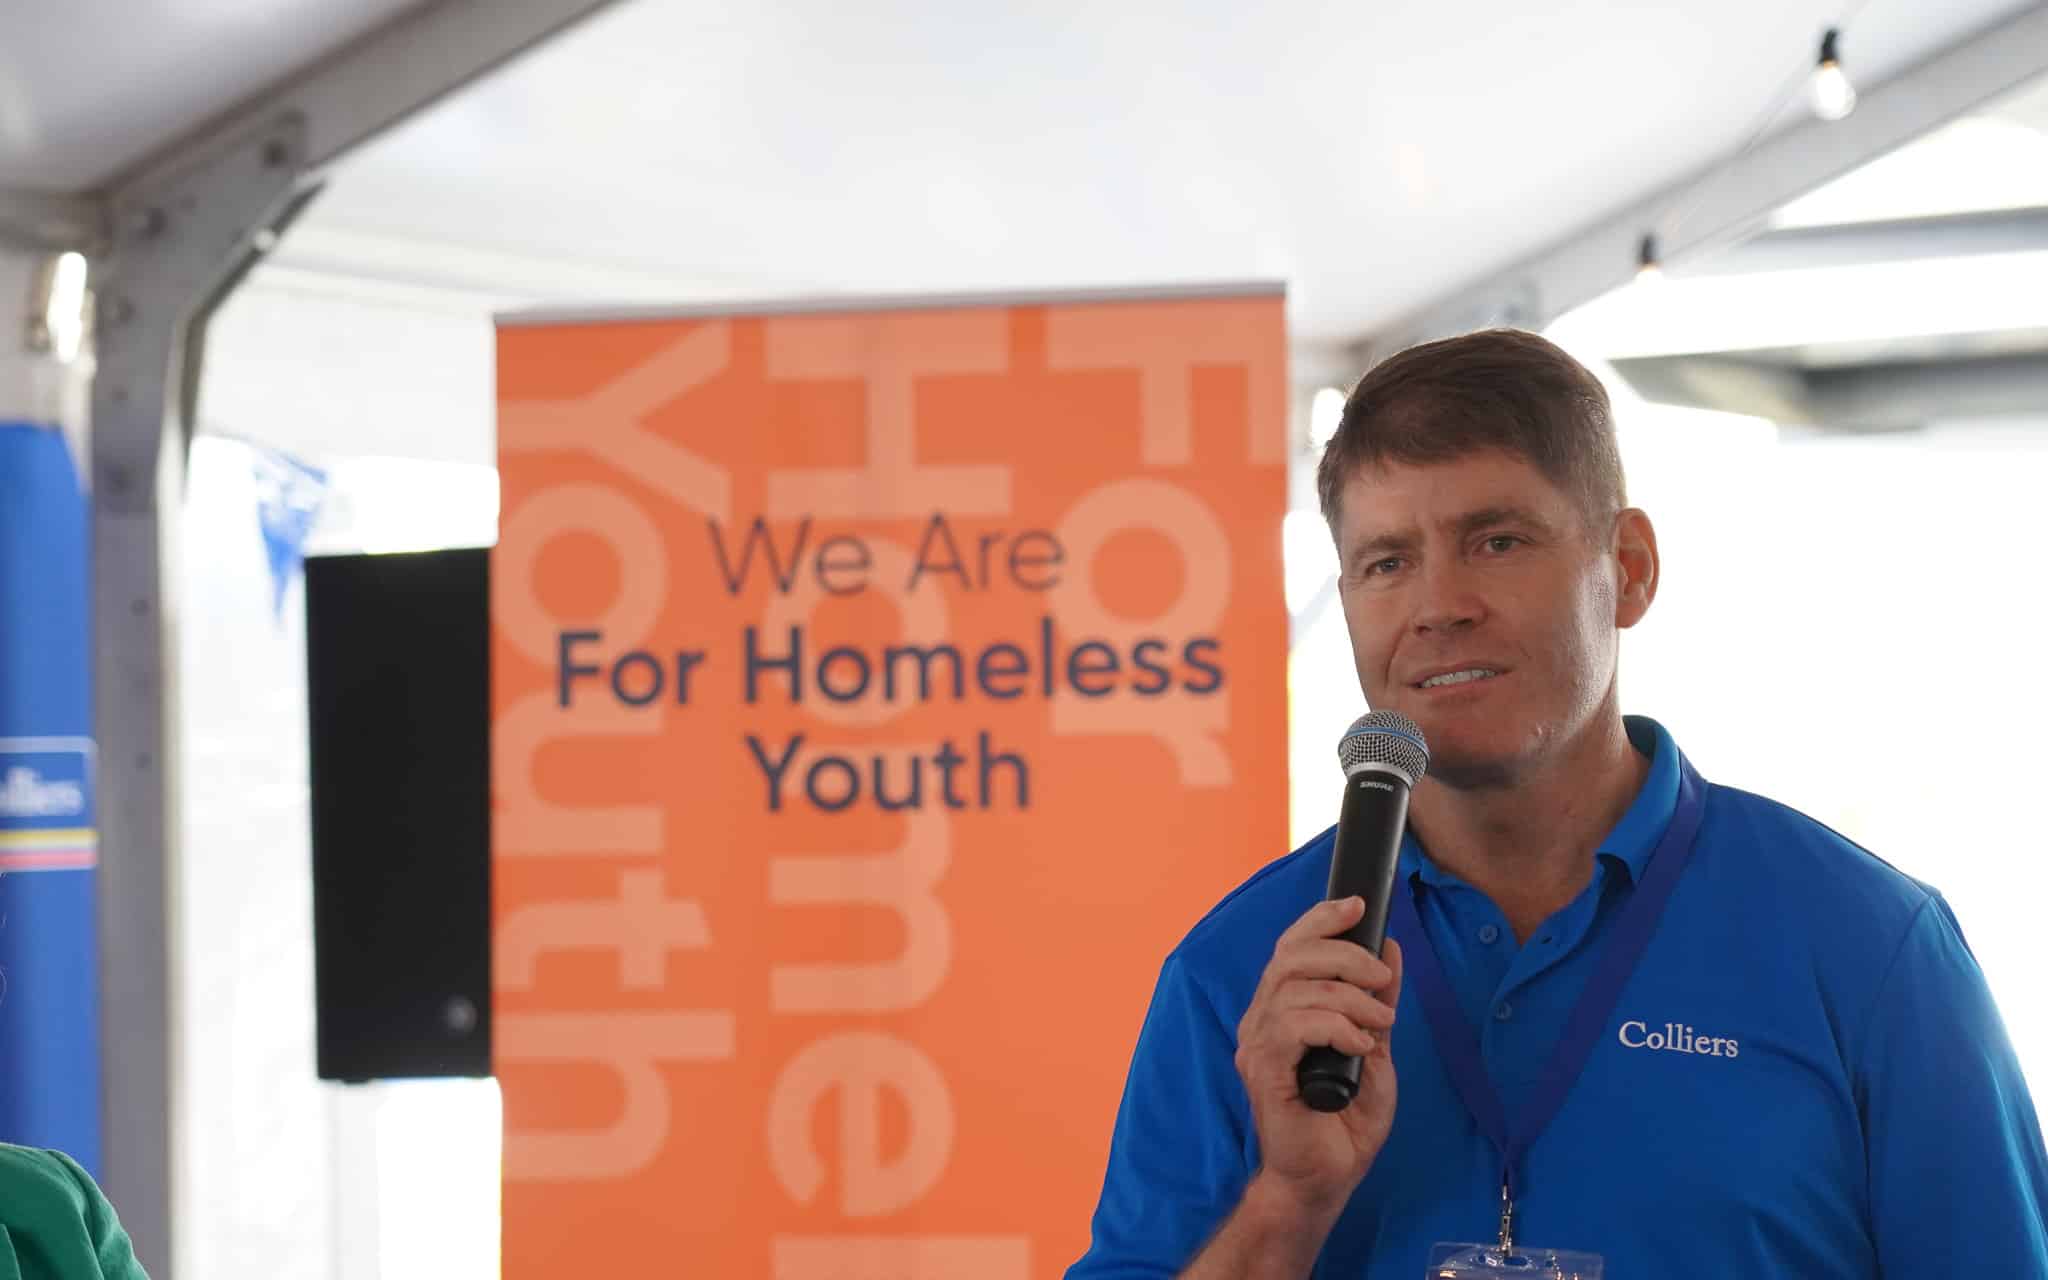 Navigating Change for Homeless Youth